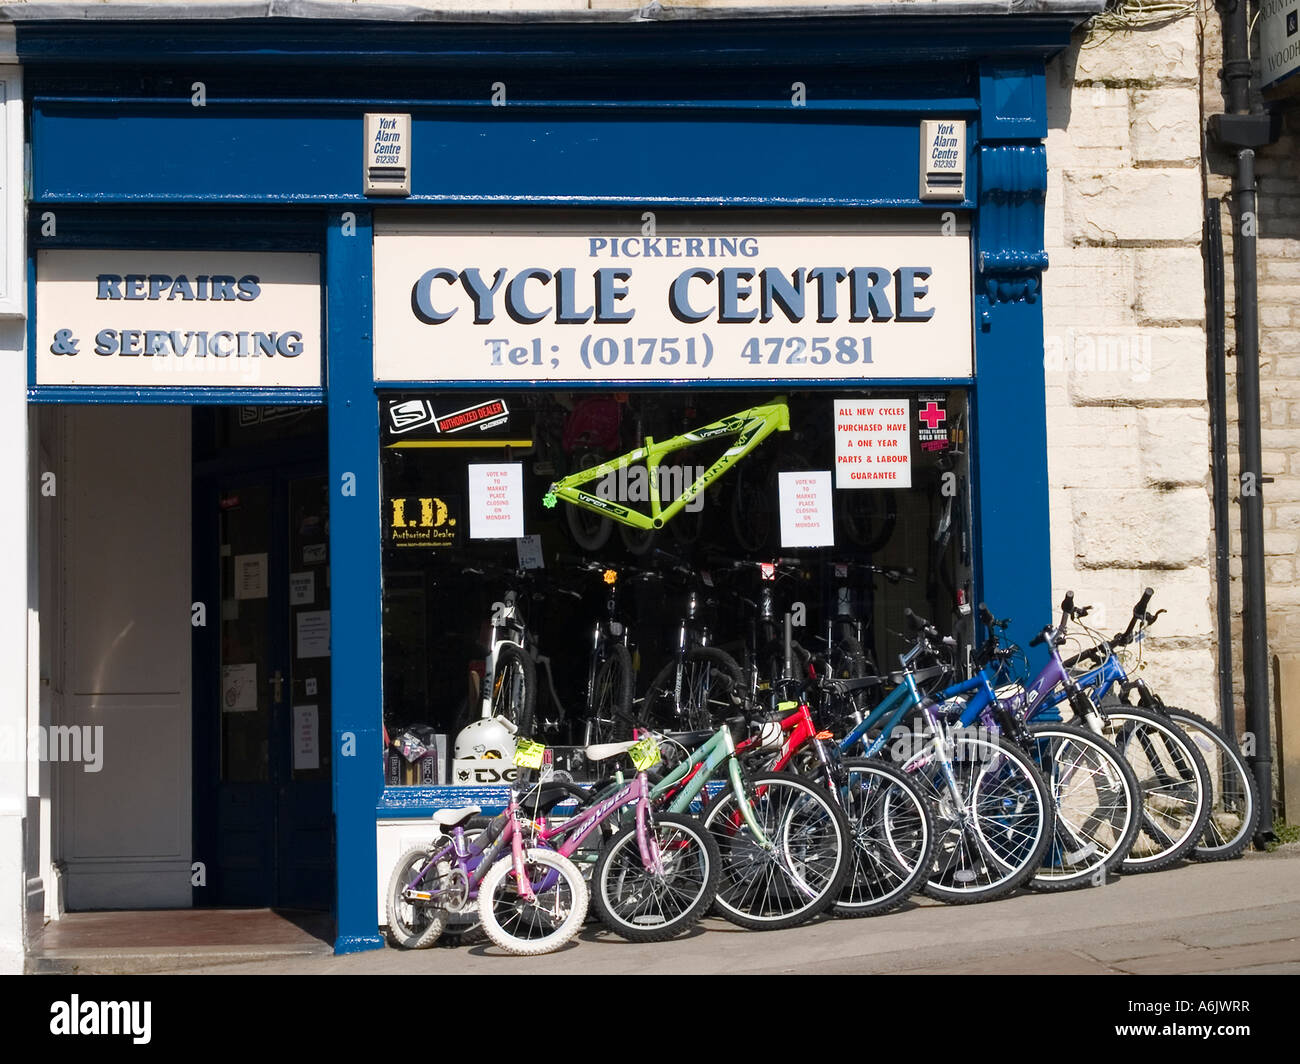 Bicycle shop in Pickering North Yorkshire Stock Photo